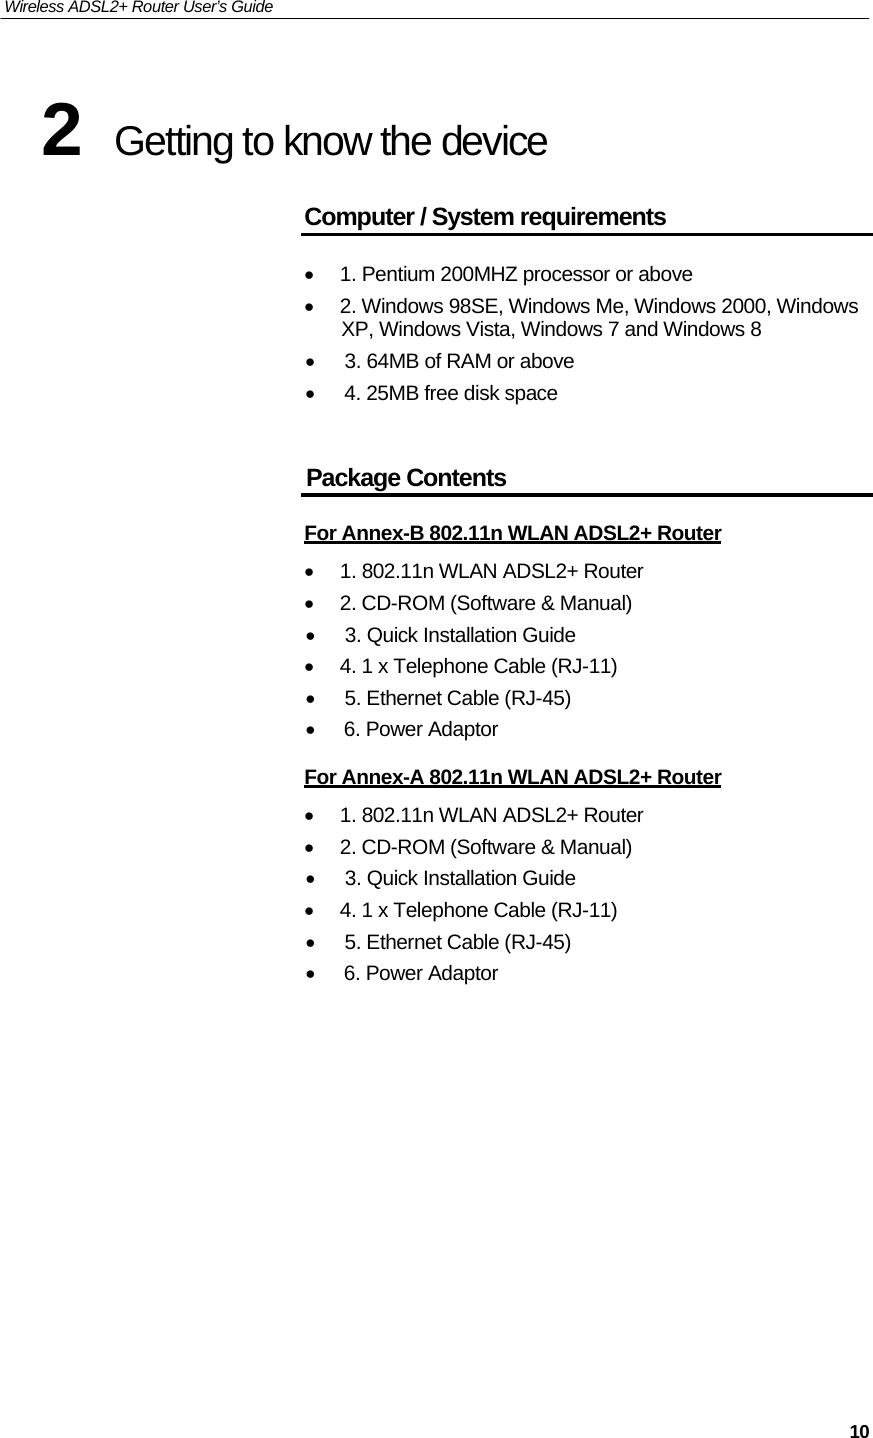 Wireless ADSL2+ Router User’s Guide     2 Getting to know the device  Computer / System requirements   • 1. Pentium 200MHZ processor or above • 2. Windows 98SE, Windows Me, Windows 2000, Windows XP, Windows Vista, Windows 7 and Windows 8 • 3. 64MB of RAM or above • 4. 25MB free disk space    Package Contents   For Annex-B 802.11n WLAN ADSL2+ Router  • 1. 802.11n WLAN ADSL2+ Router • 2. CD-ROM (Software &amp; Manual) • 3. Quick Installation Guide • 4. 1 x Telephone Cable (RJ-11) • 5. Ethernet Cable (RJ-45) • 6. Power Adaptor  For Annex-A 802.11n WLAN ADSL2+ Router  • 1. 802.11n WLAN ADSL2+ Router • 2. CD-ROM (Software &amp; Manual) • 3. Quick Installation Guide • 4. 1 x Telephone Cable (RJ-11) • 5. Ethernet Cable (RJ-45) • 6. Power Adaptor                      10 